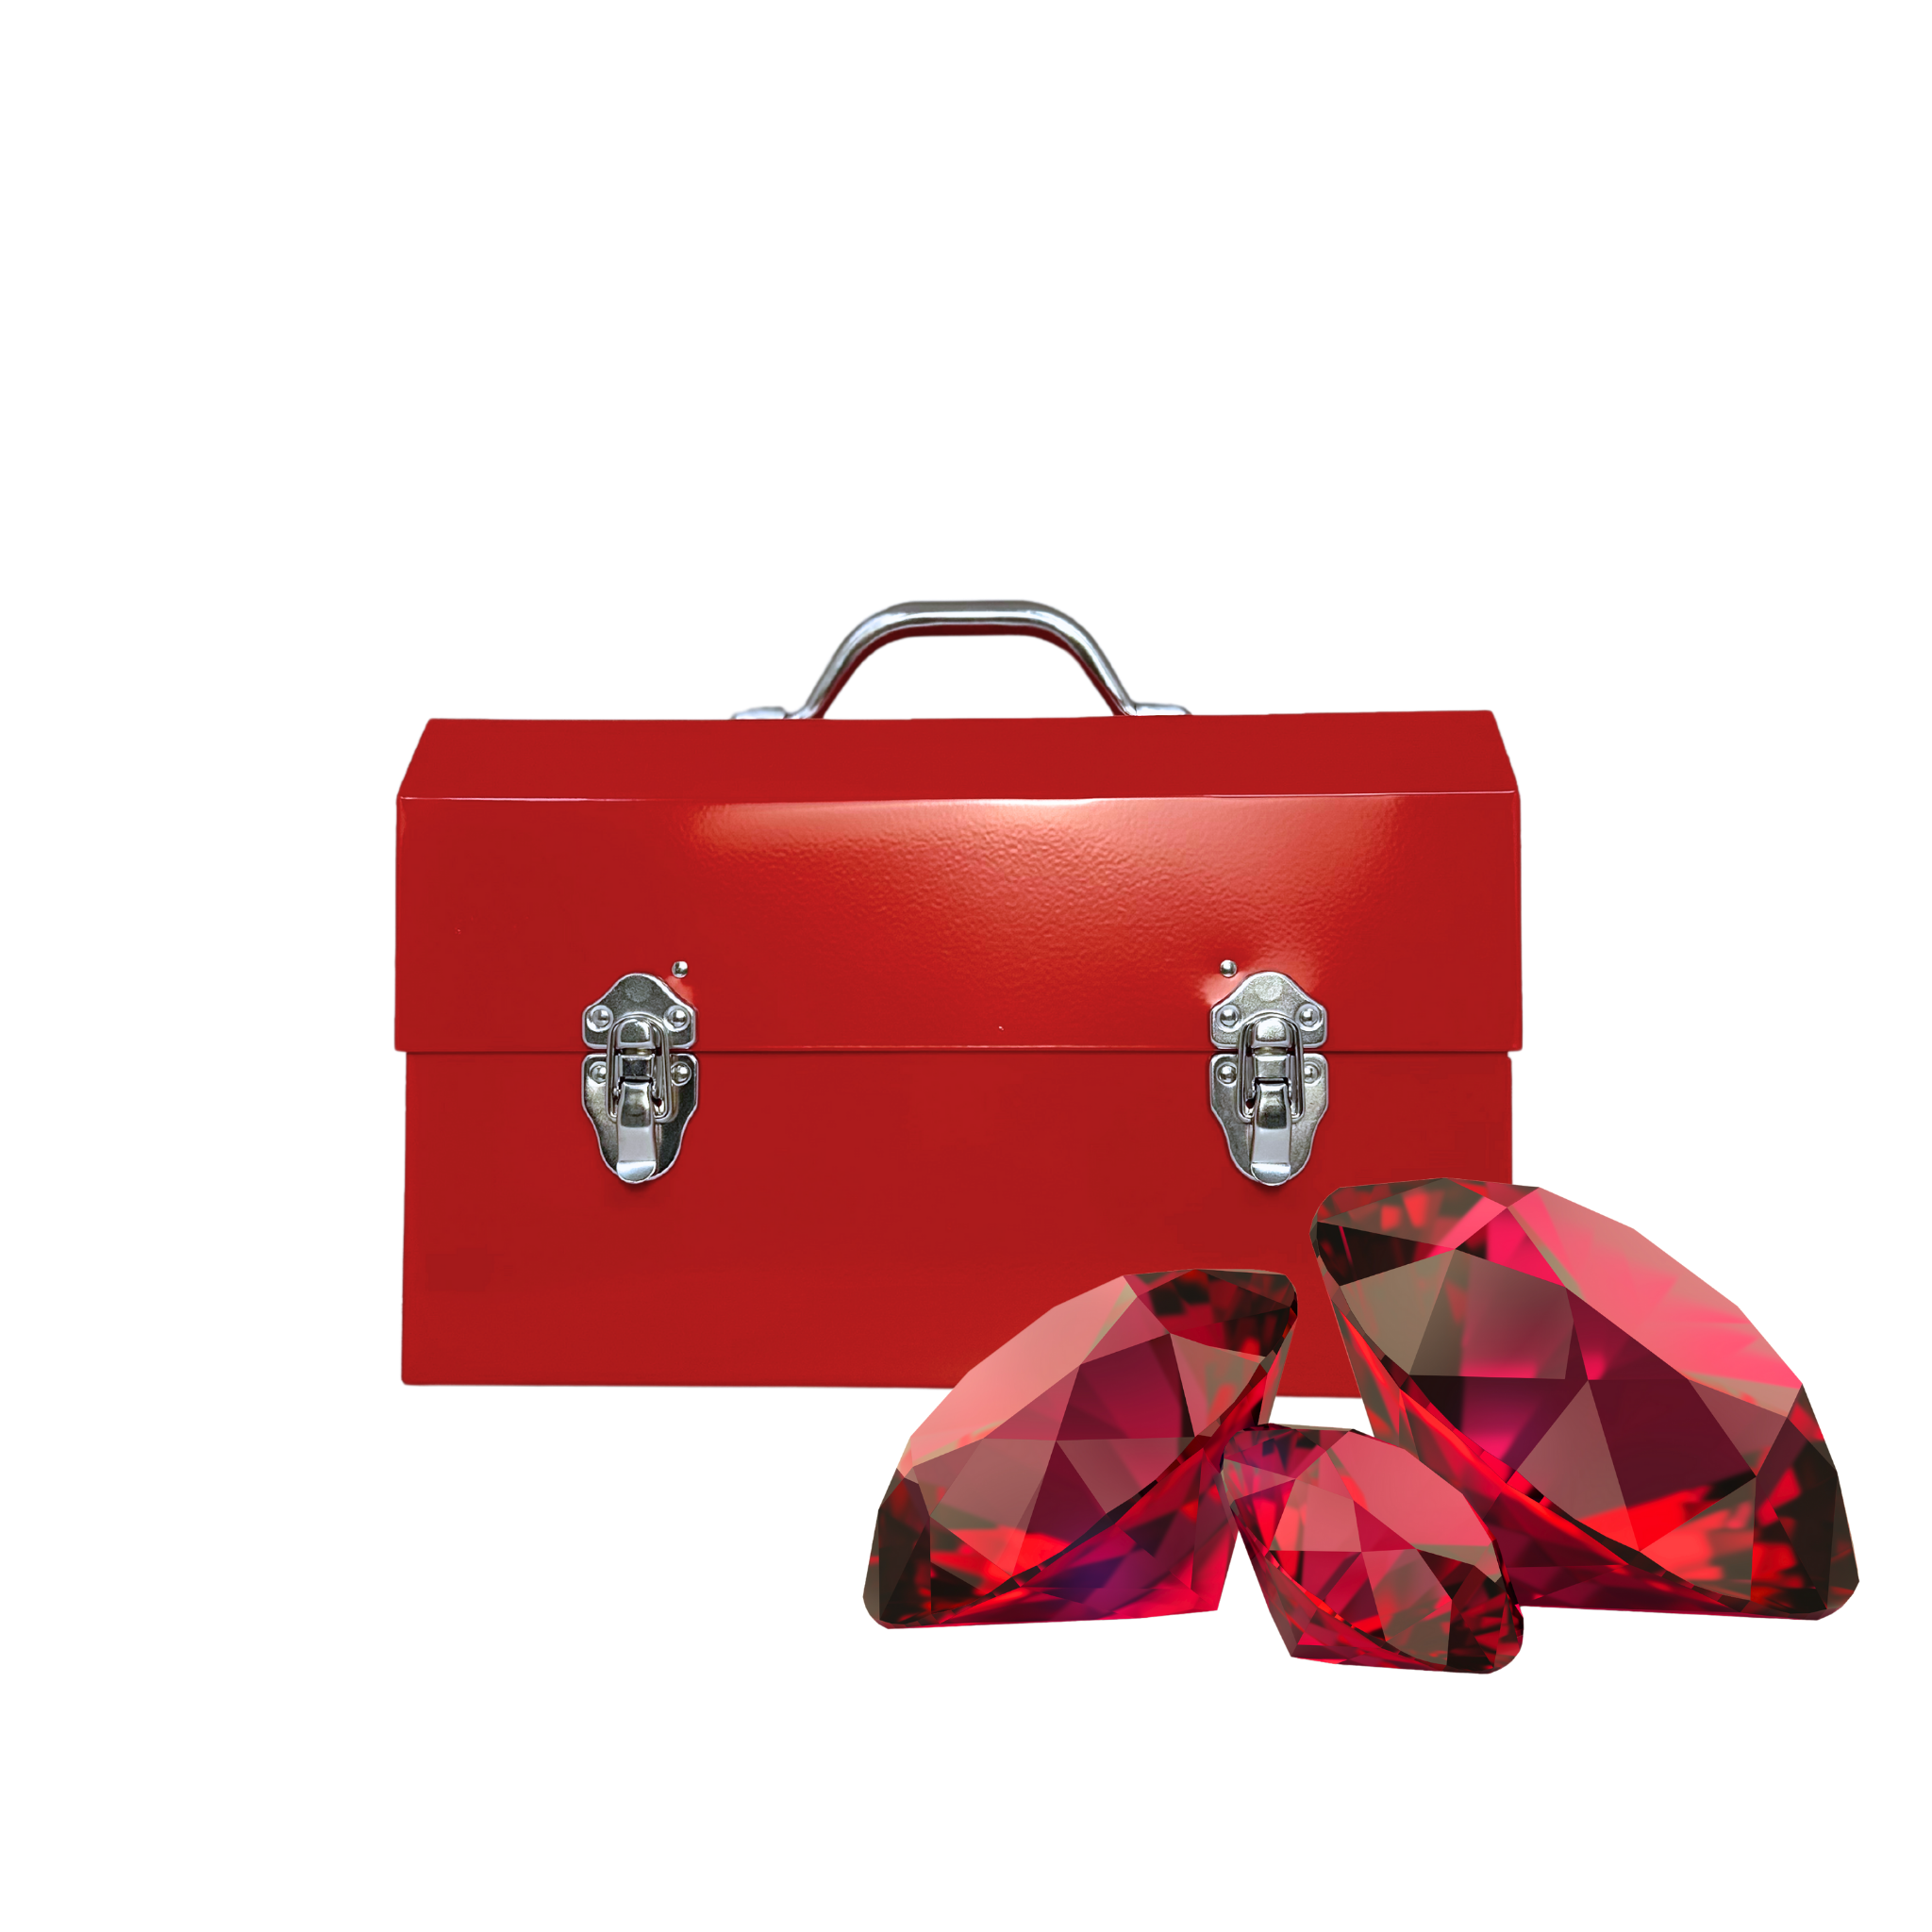 L. May aluminum lunchbox powder coated in red for the gemstone ruby collection